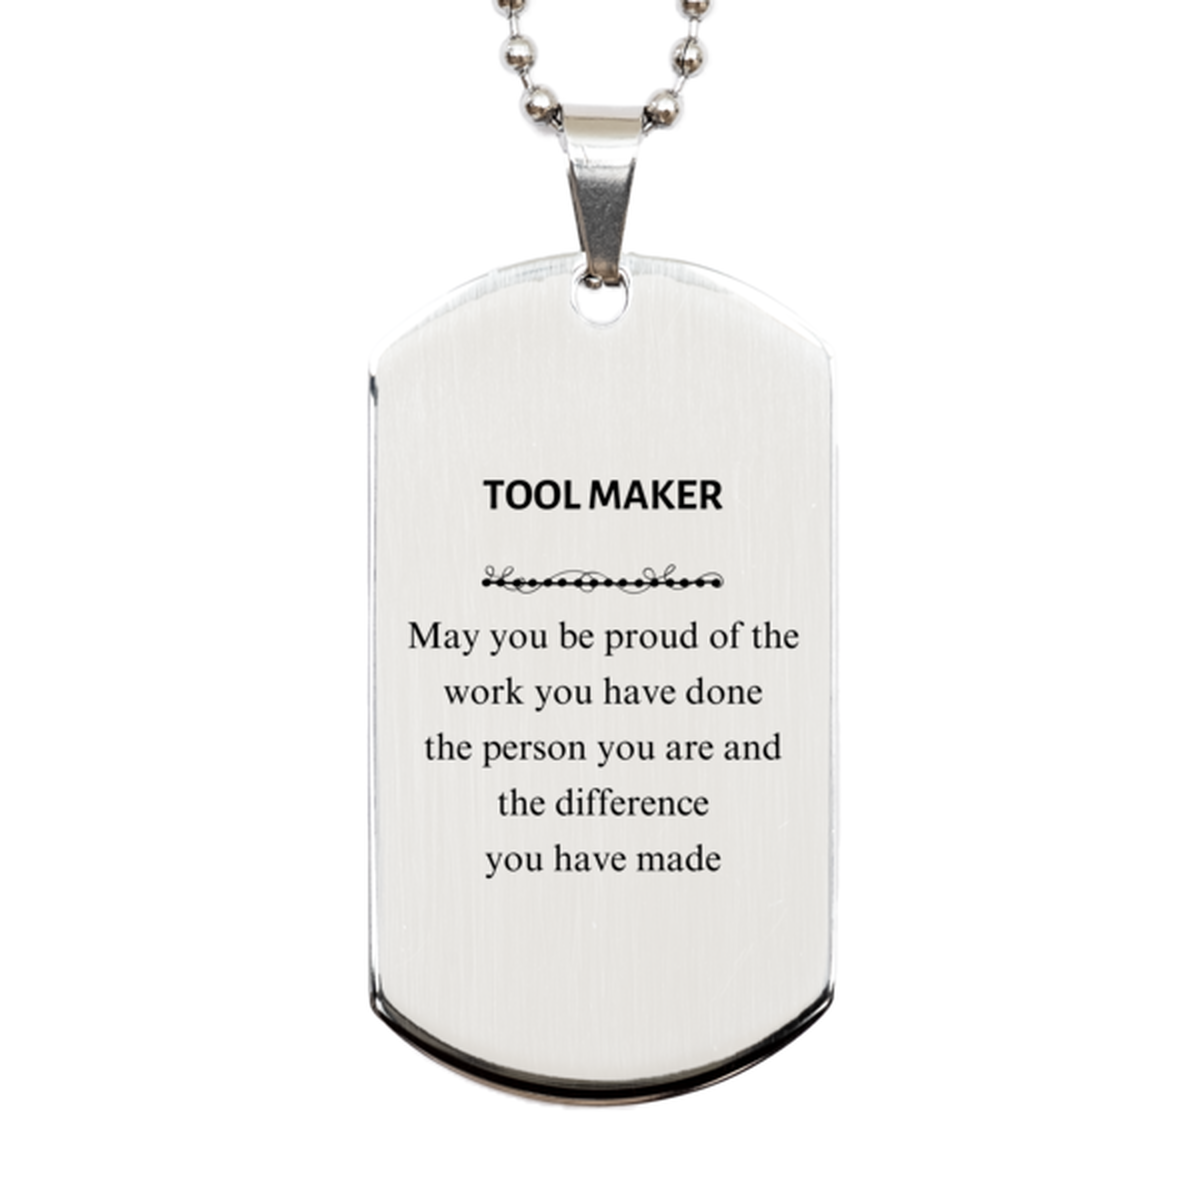 Tool Maker May you be proud of the work you have done, Retirement Tool Maker Silver Dog Tag for Colleague Appreciation Gifts Amazing for Tool Maker